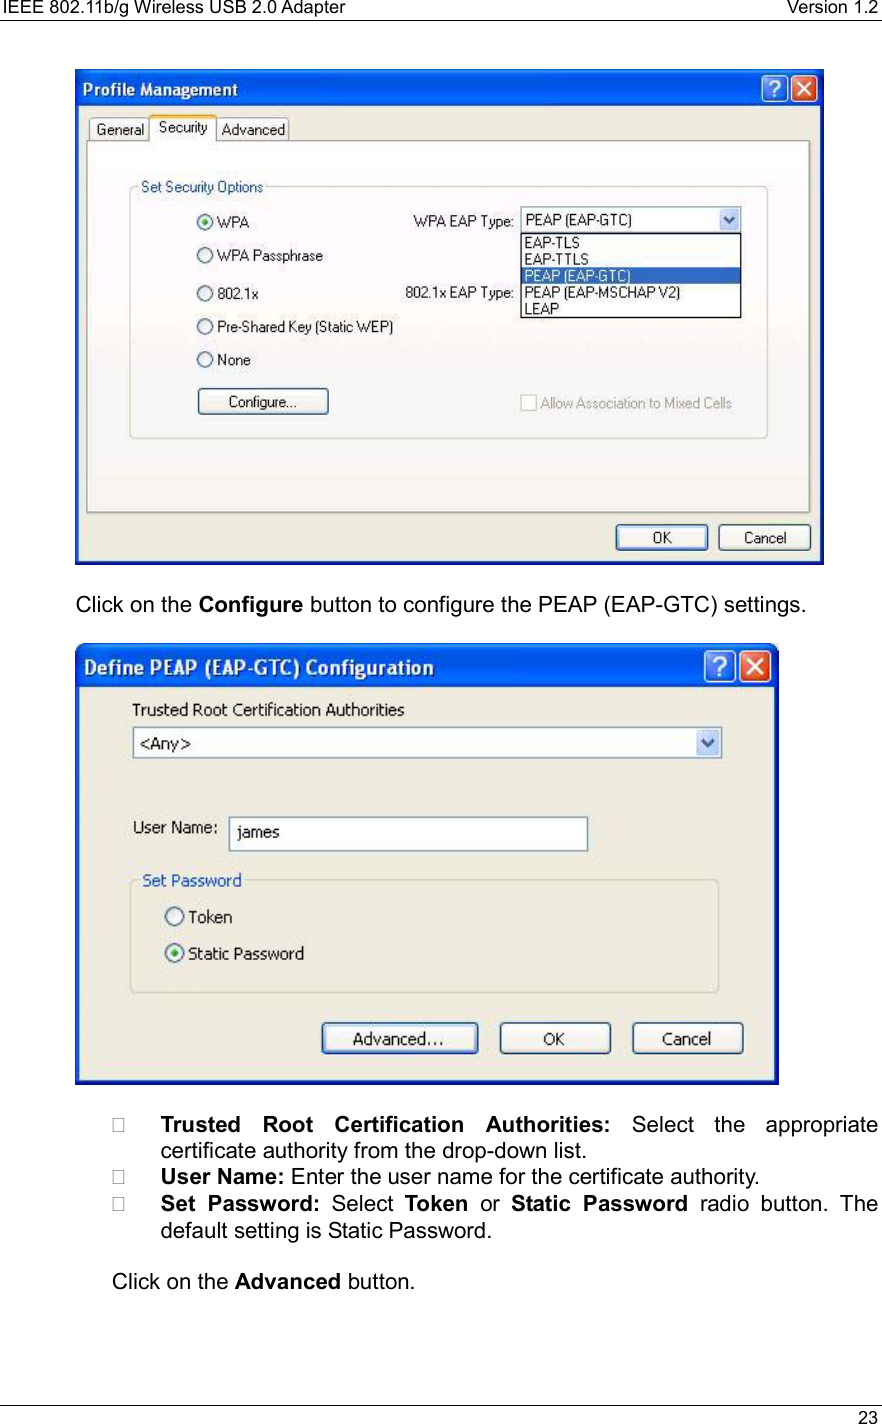 IEEE 802.11b/g Wireless USB 2.0 Adapter    Version 1.2   23    Click on the Configure button to configure the PEAP (EAP-GTC) settings.      Trusted Root Certification Authorities: Select the appropriate certificate authority from the drop-down list.     User Name: Enter the user name for the certificate authority.   Set Password: Select Token or Static Password radio button. The default setting is Static Password.    Click on the Advanced button.    